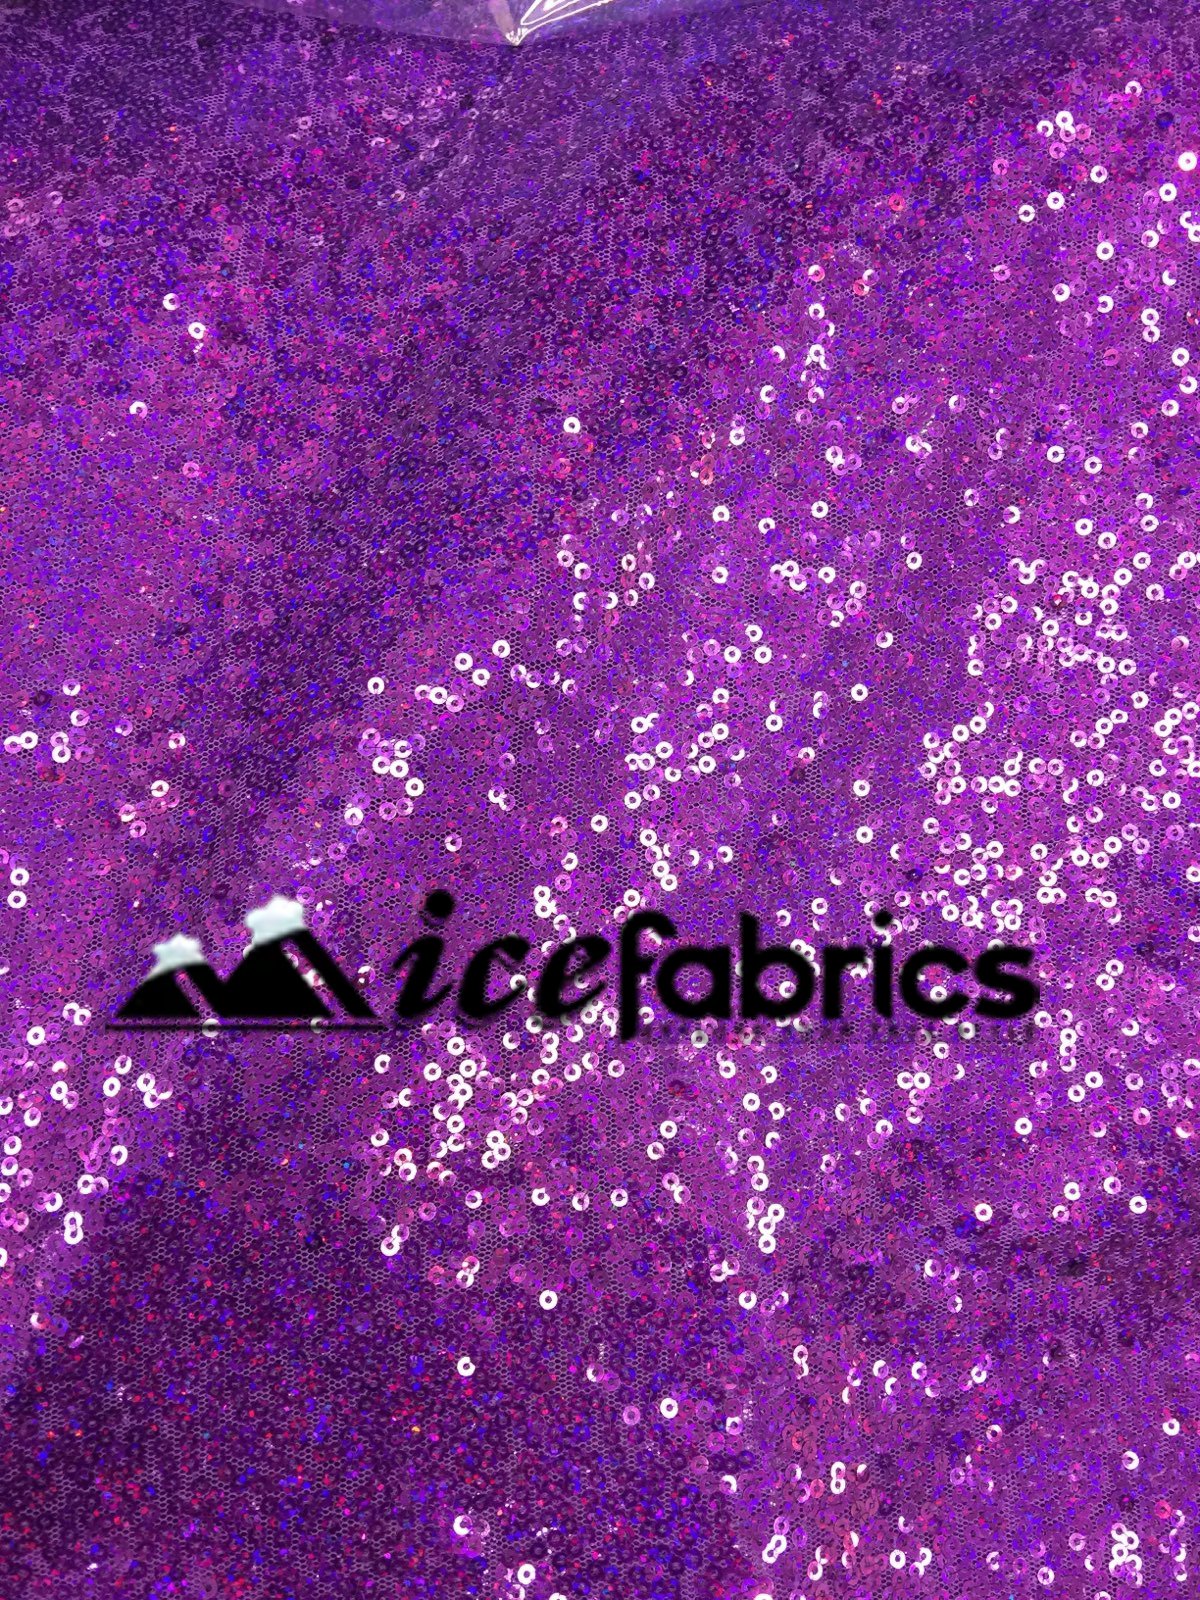 Luxurious Mesh Glitz Sequin Fabric By The Roll (20 yards) Fabric WholesaleICE FABRICSICE FABRICSPurpleBy The Roll (60" Wide)Luxurious Mesh Glitz Sequin Fabric By The Roll (20 yards) Fabric Wholesale ICE FABRICS Purple